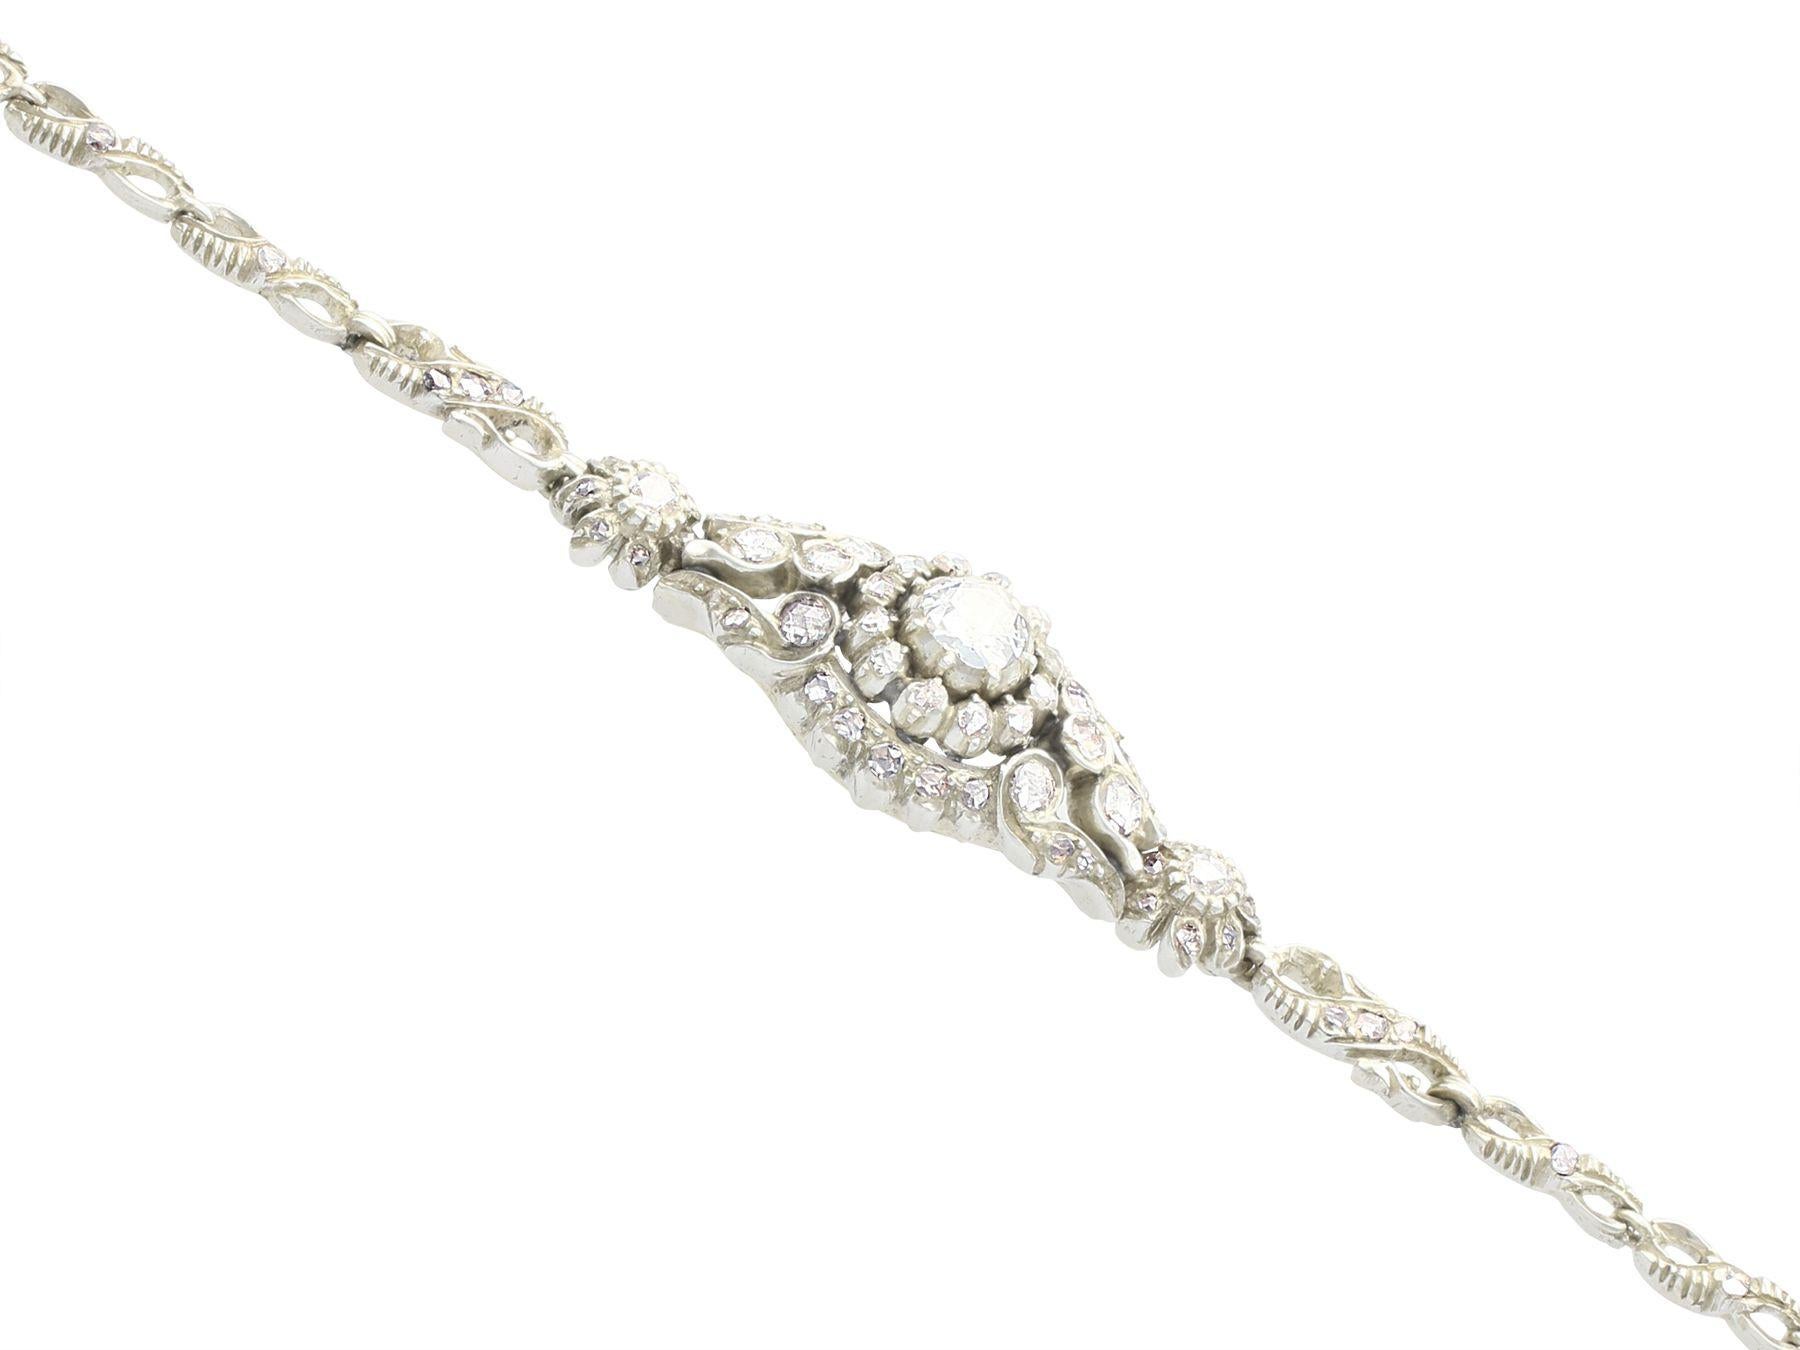 Vintage 2.75 Carat Diamond White Gold Bracelet In Excellent Condition For Sale In Jesmond, Newcastle Upon Tyne